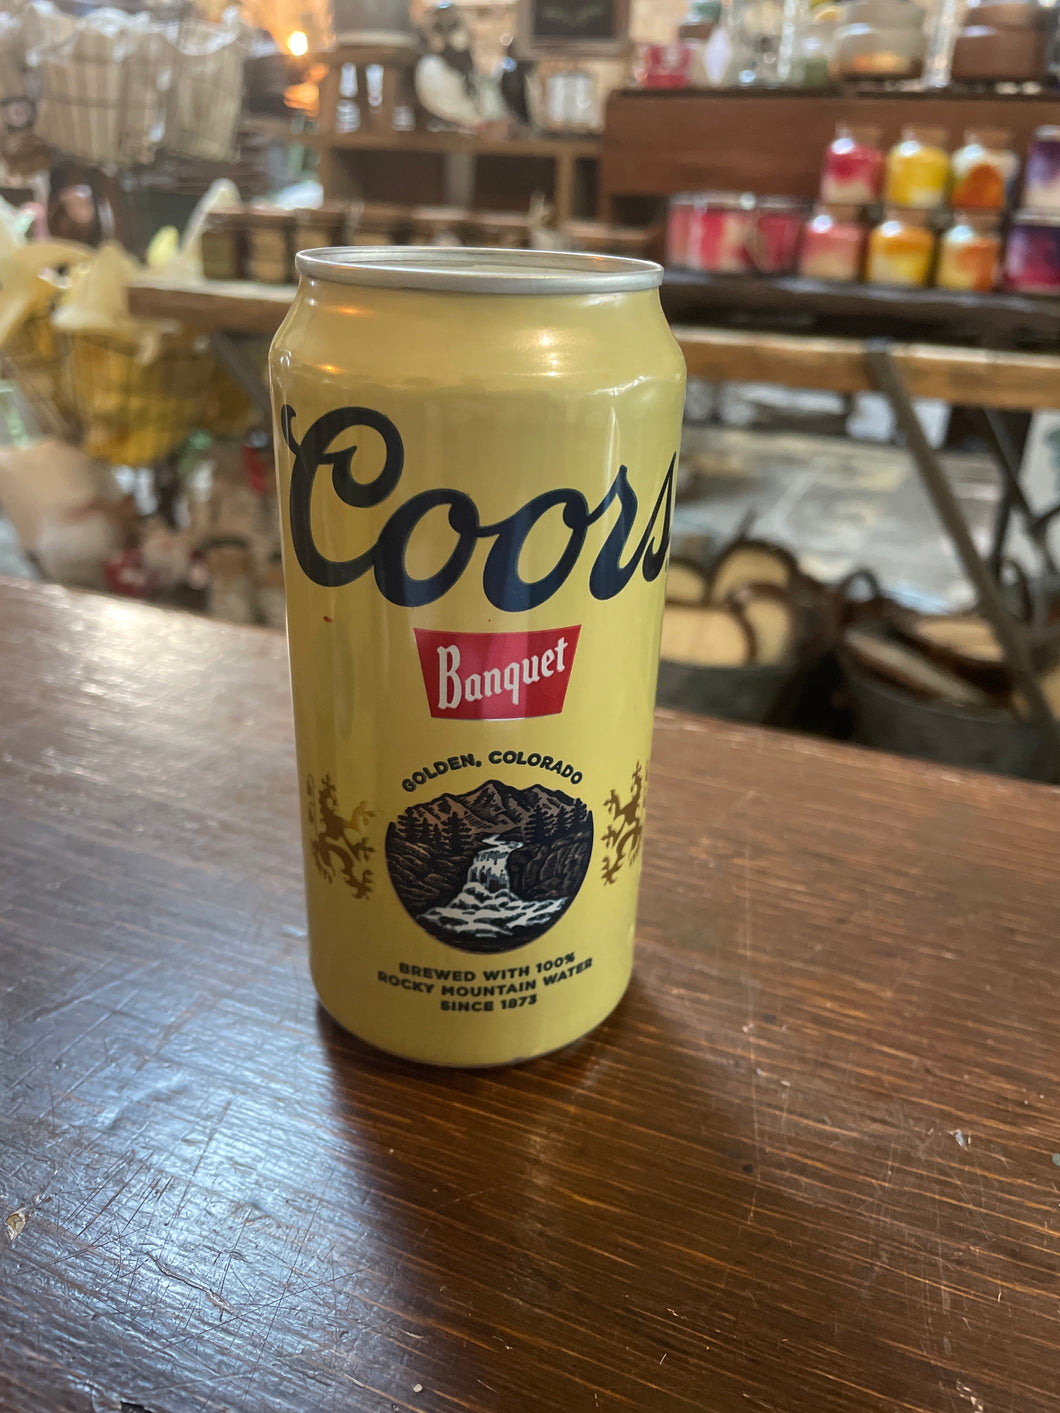 Coors Banquet Candle